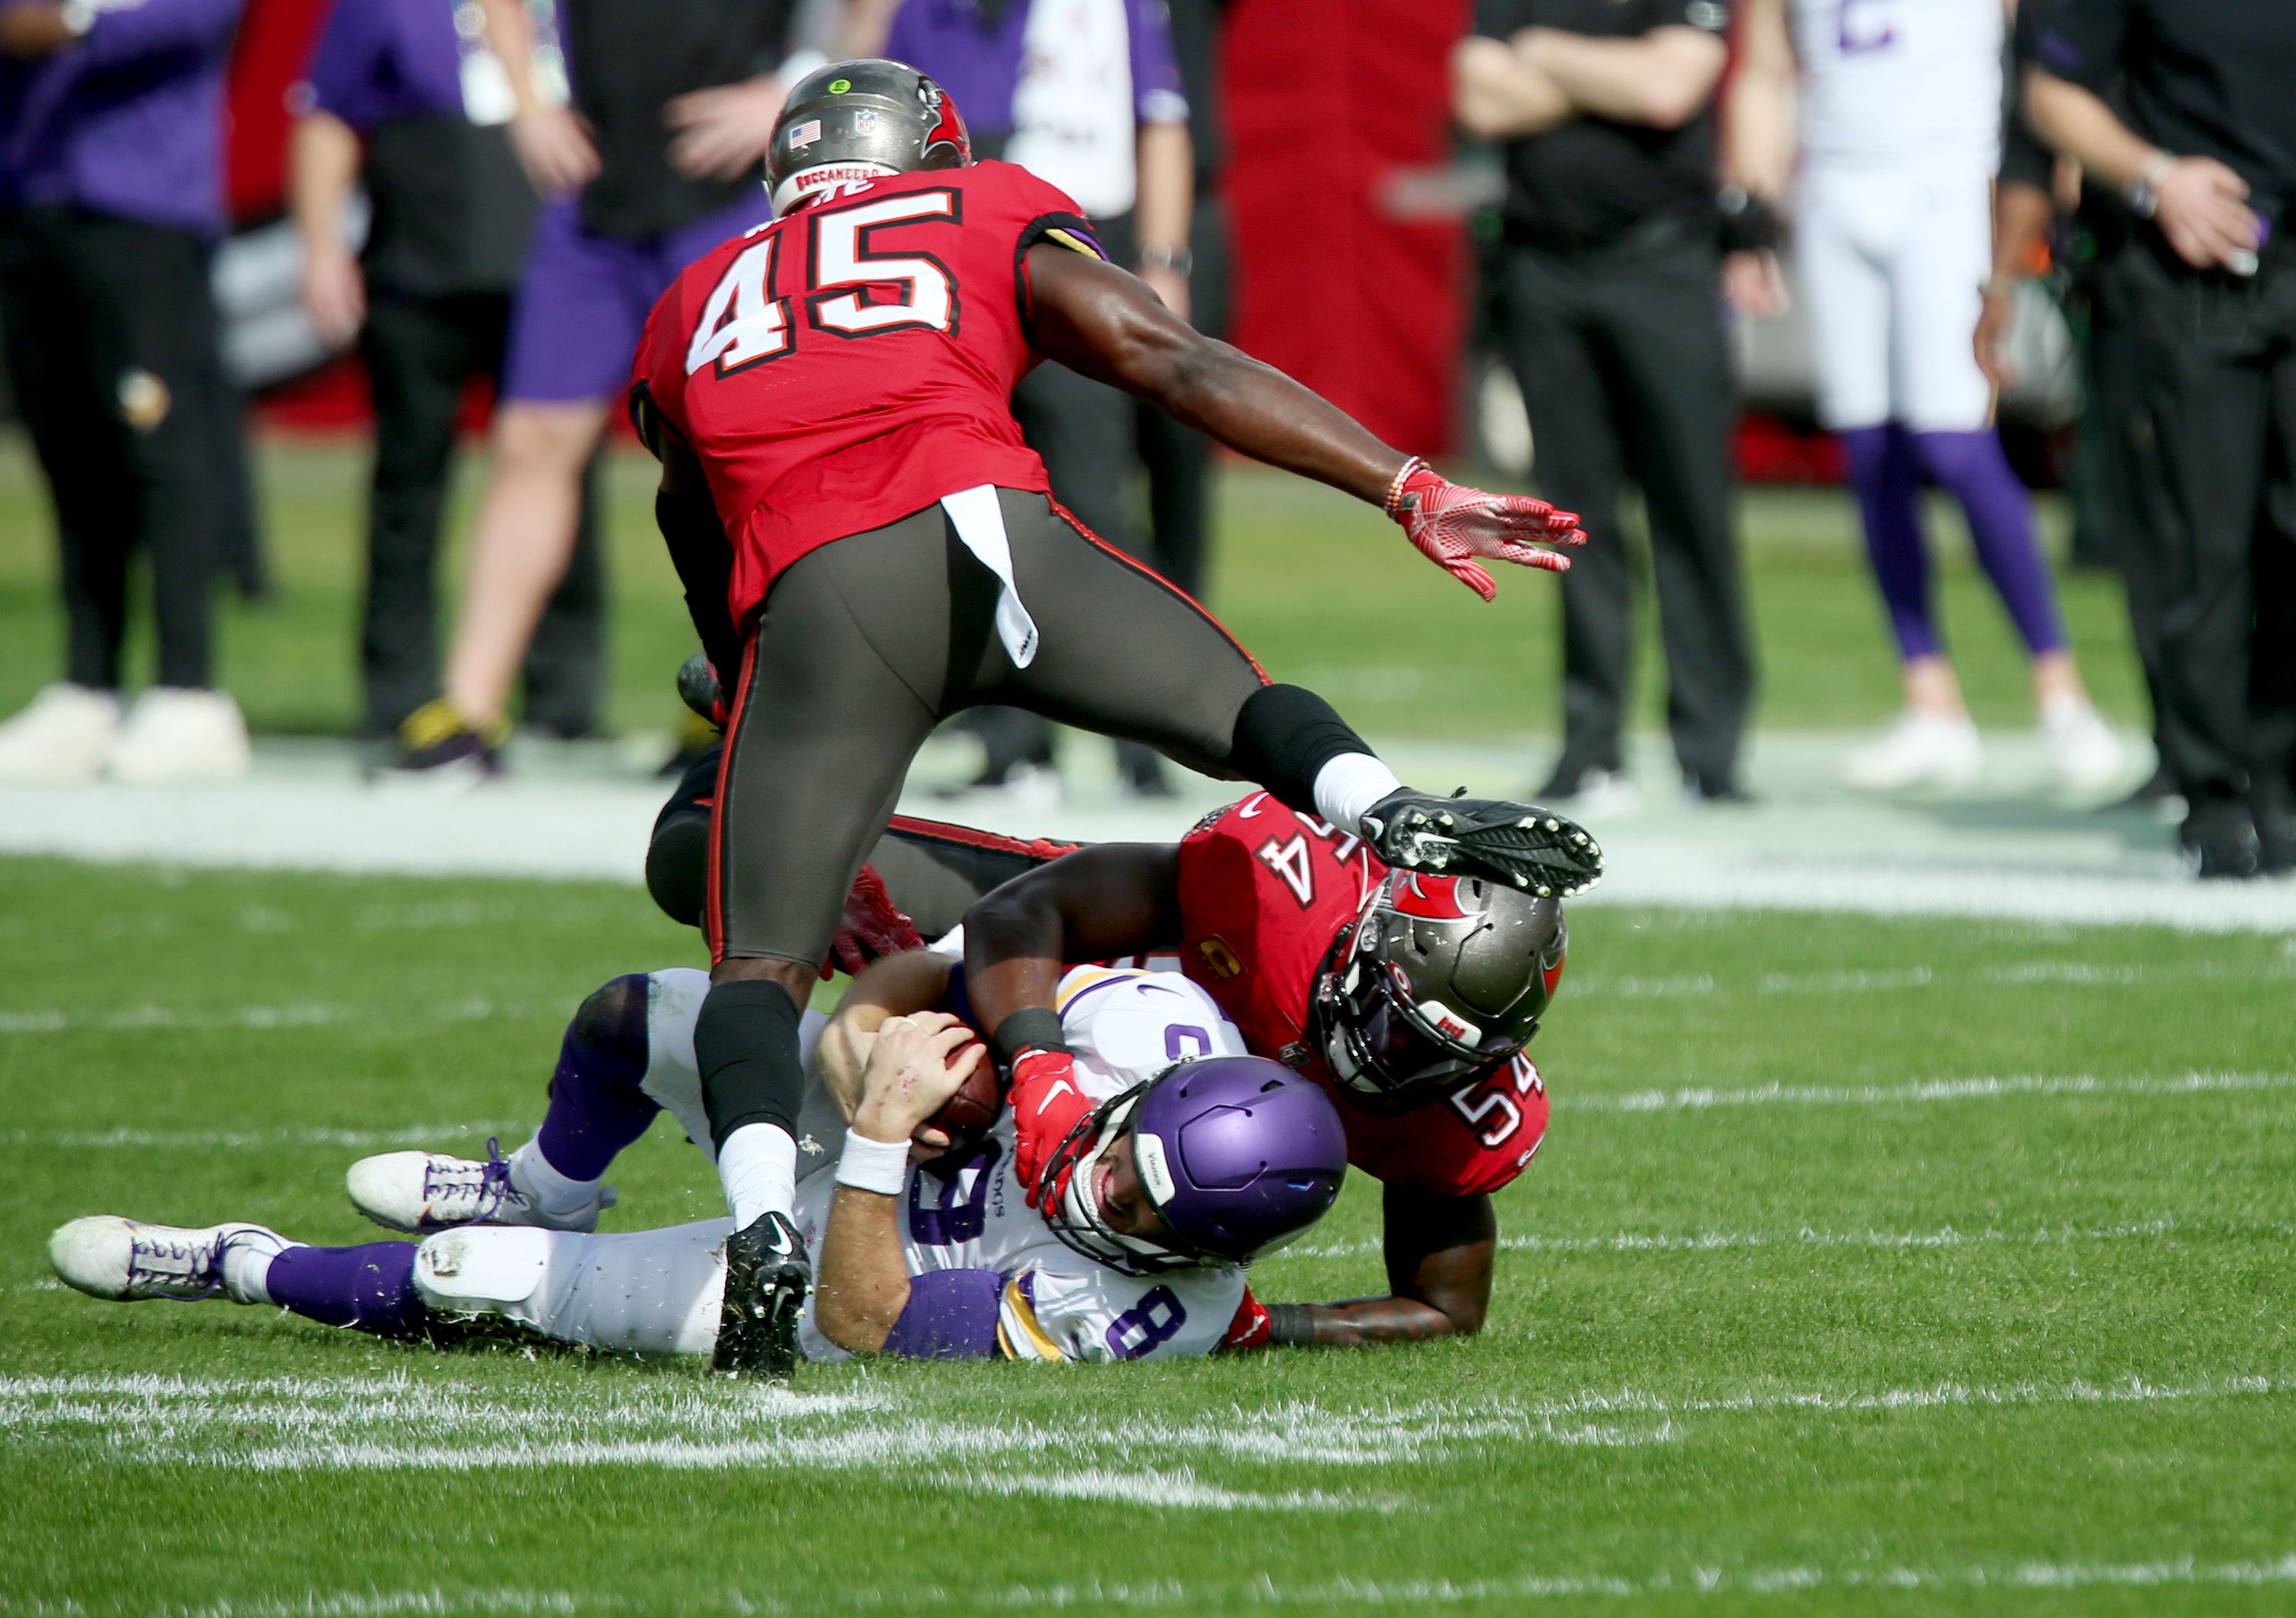 Bucs Game: Live updates from Bucs at Vikings